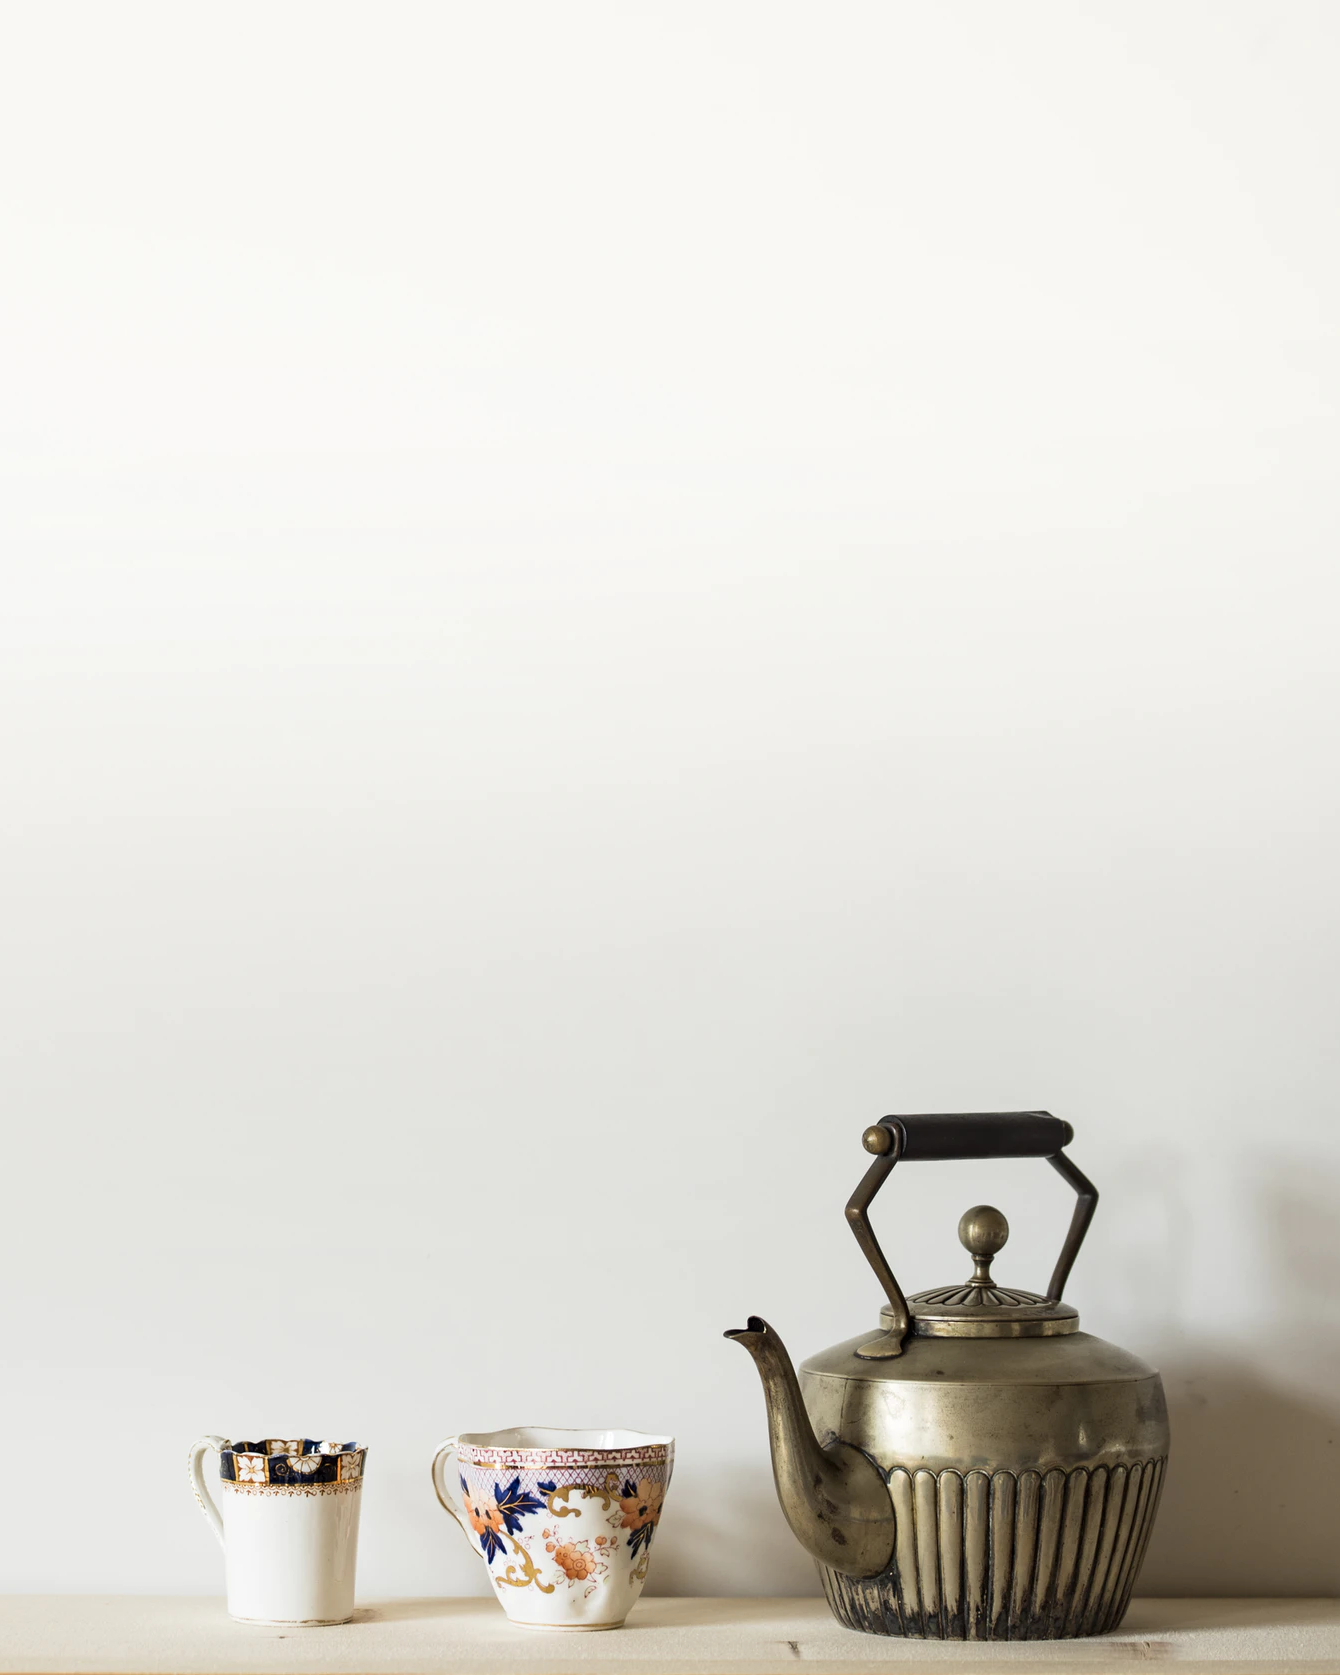 Beige background image with a tea set in the foreground.